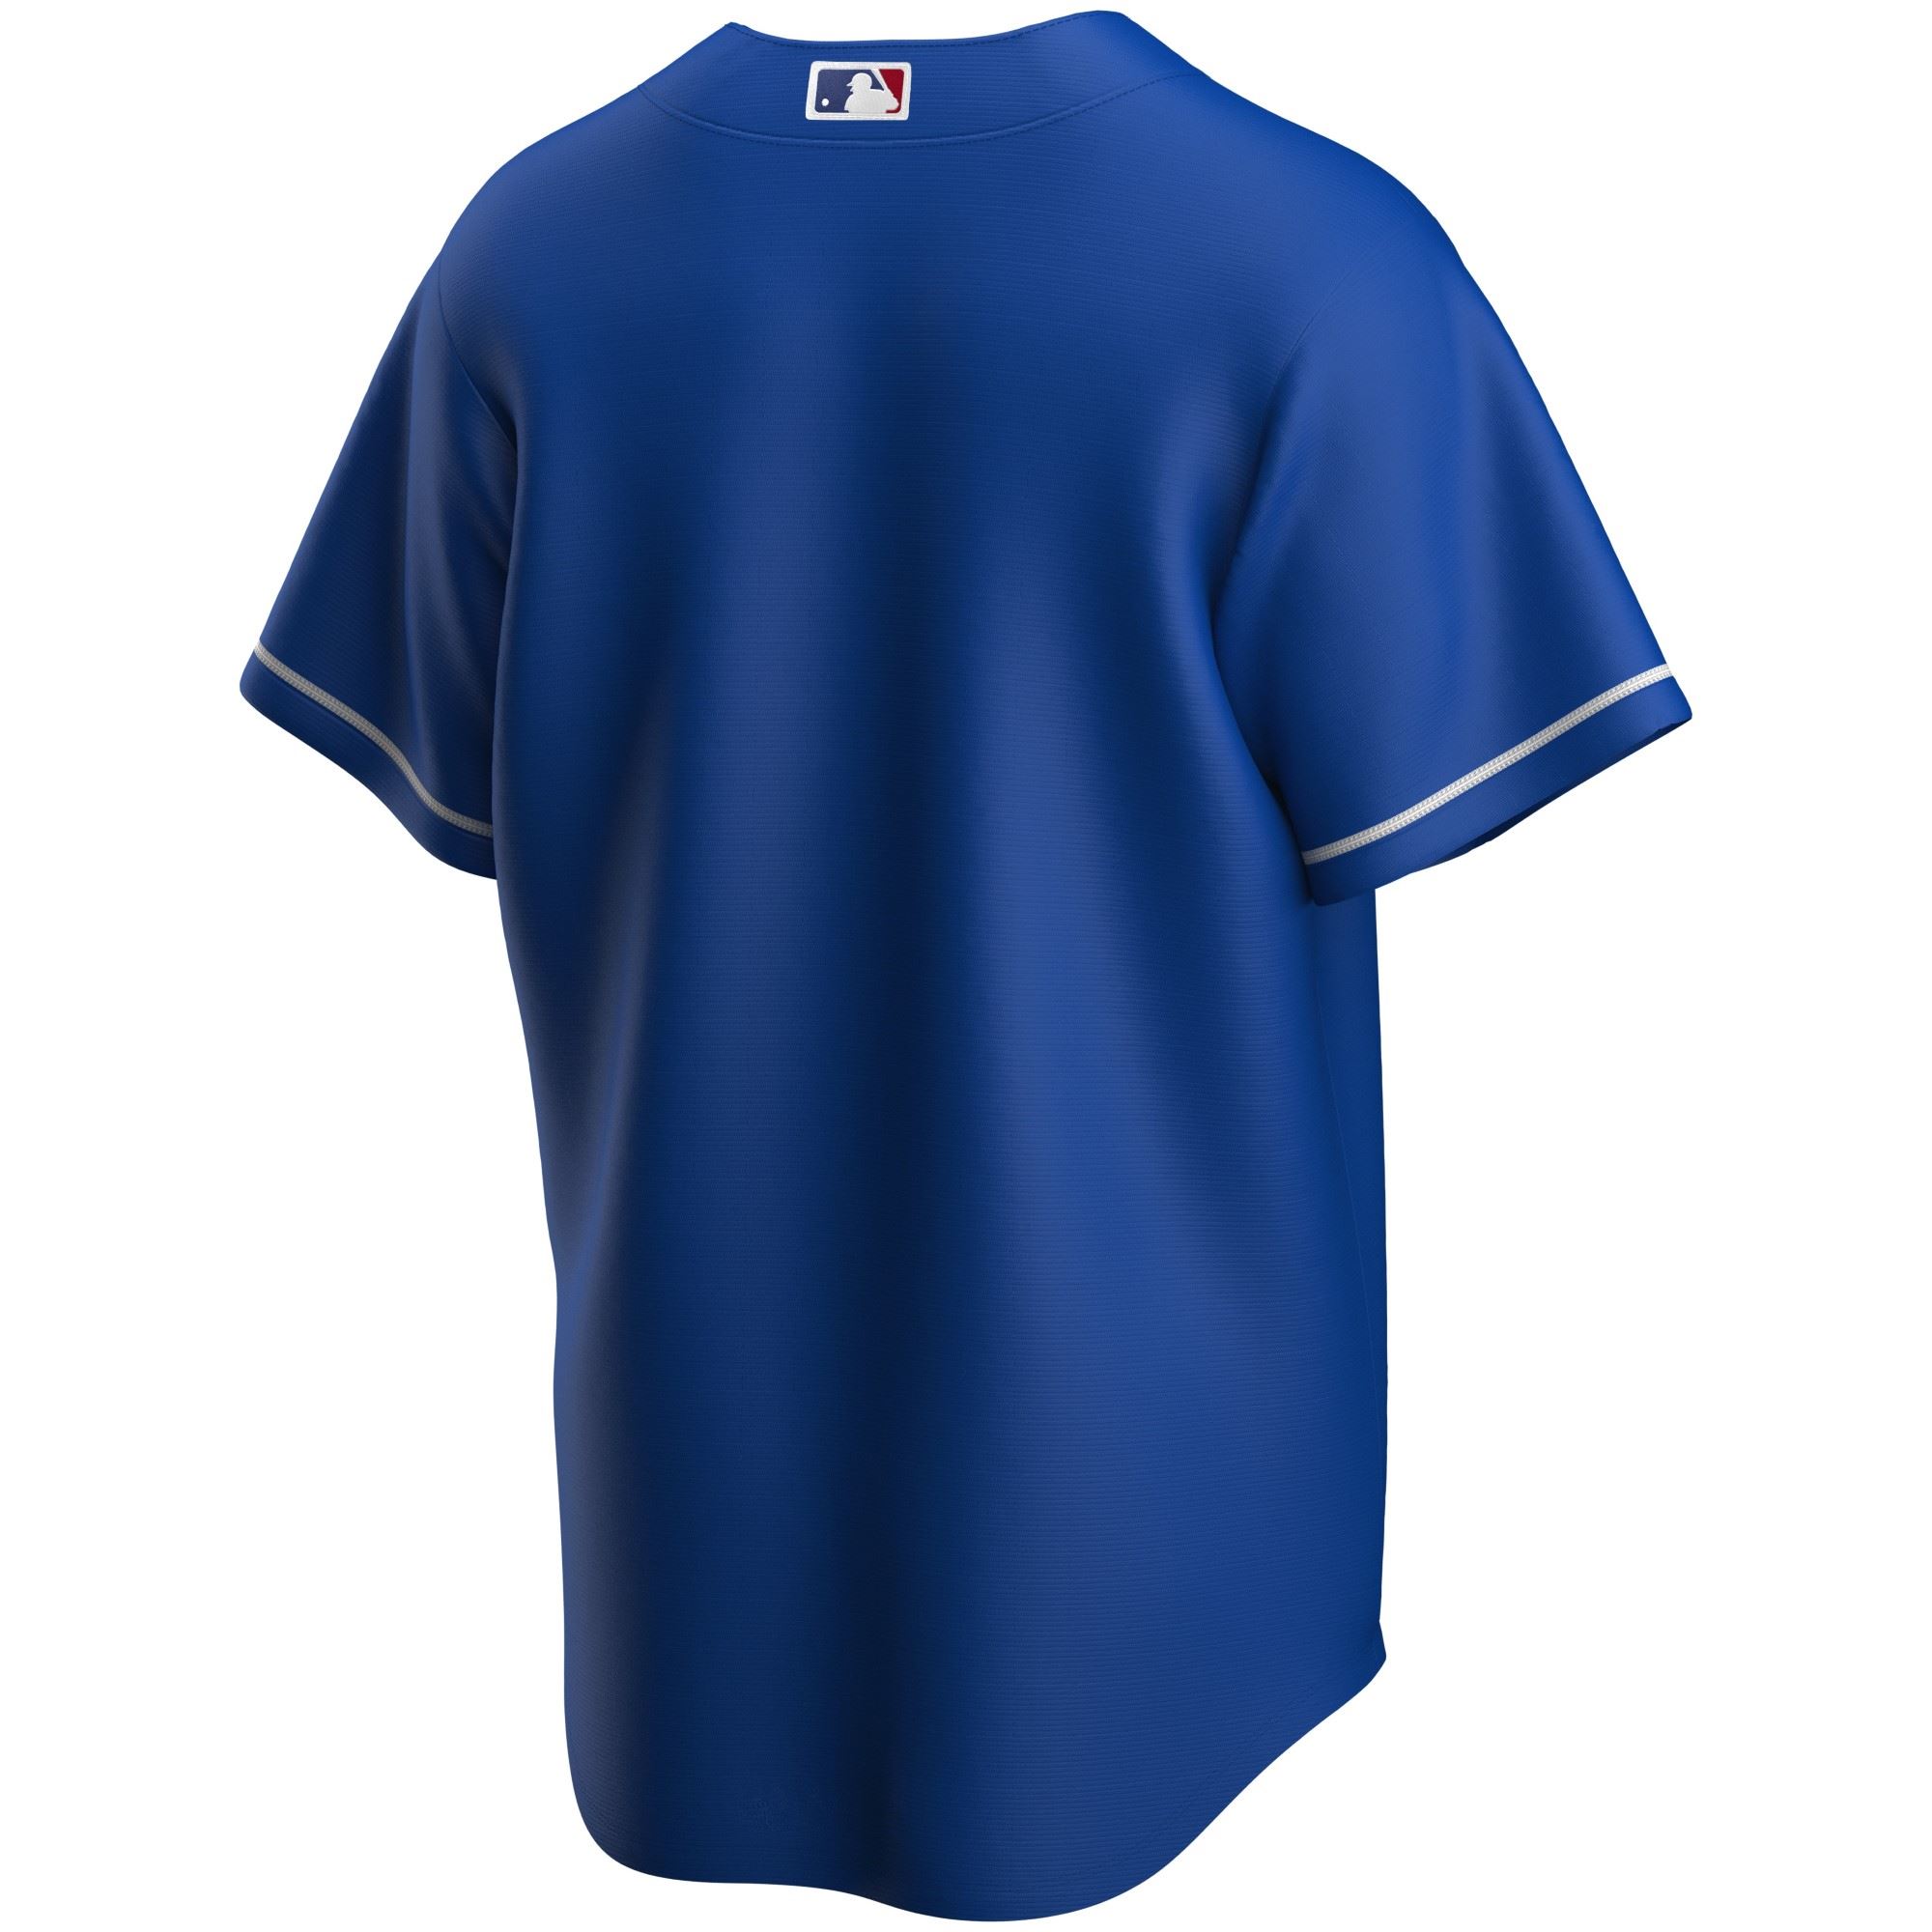 Los Angeles Dodgers Official MLB Replica Alternate Jersey Royal Nike